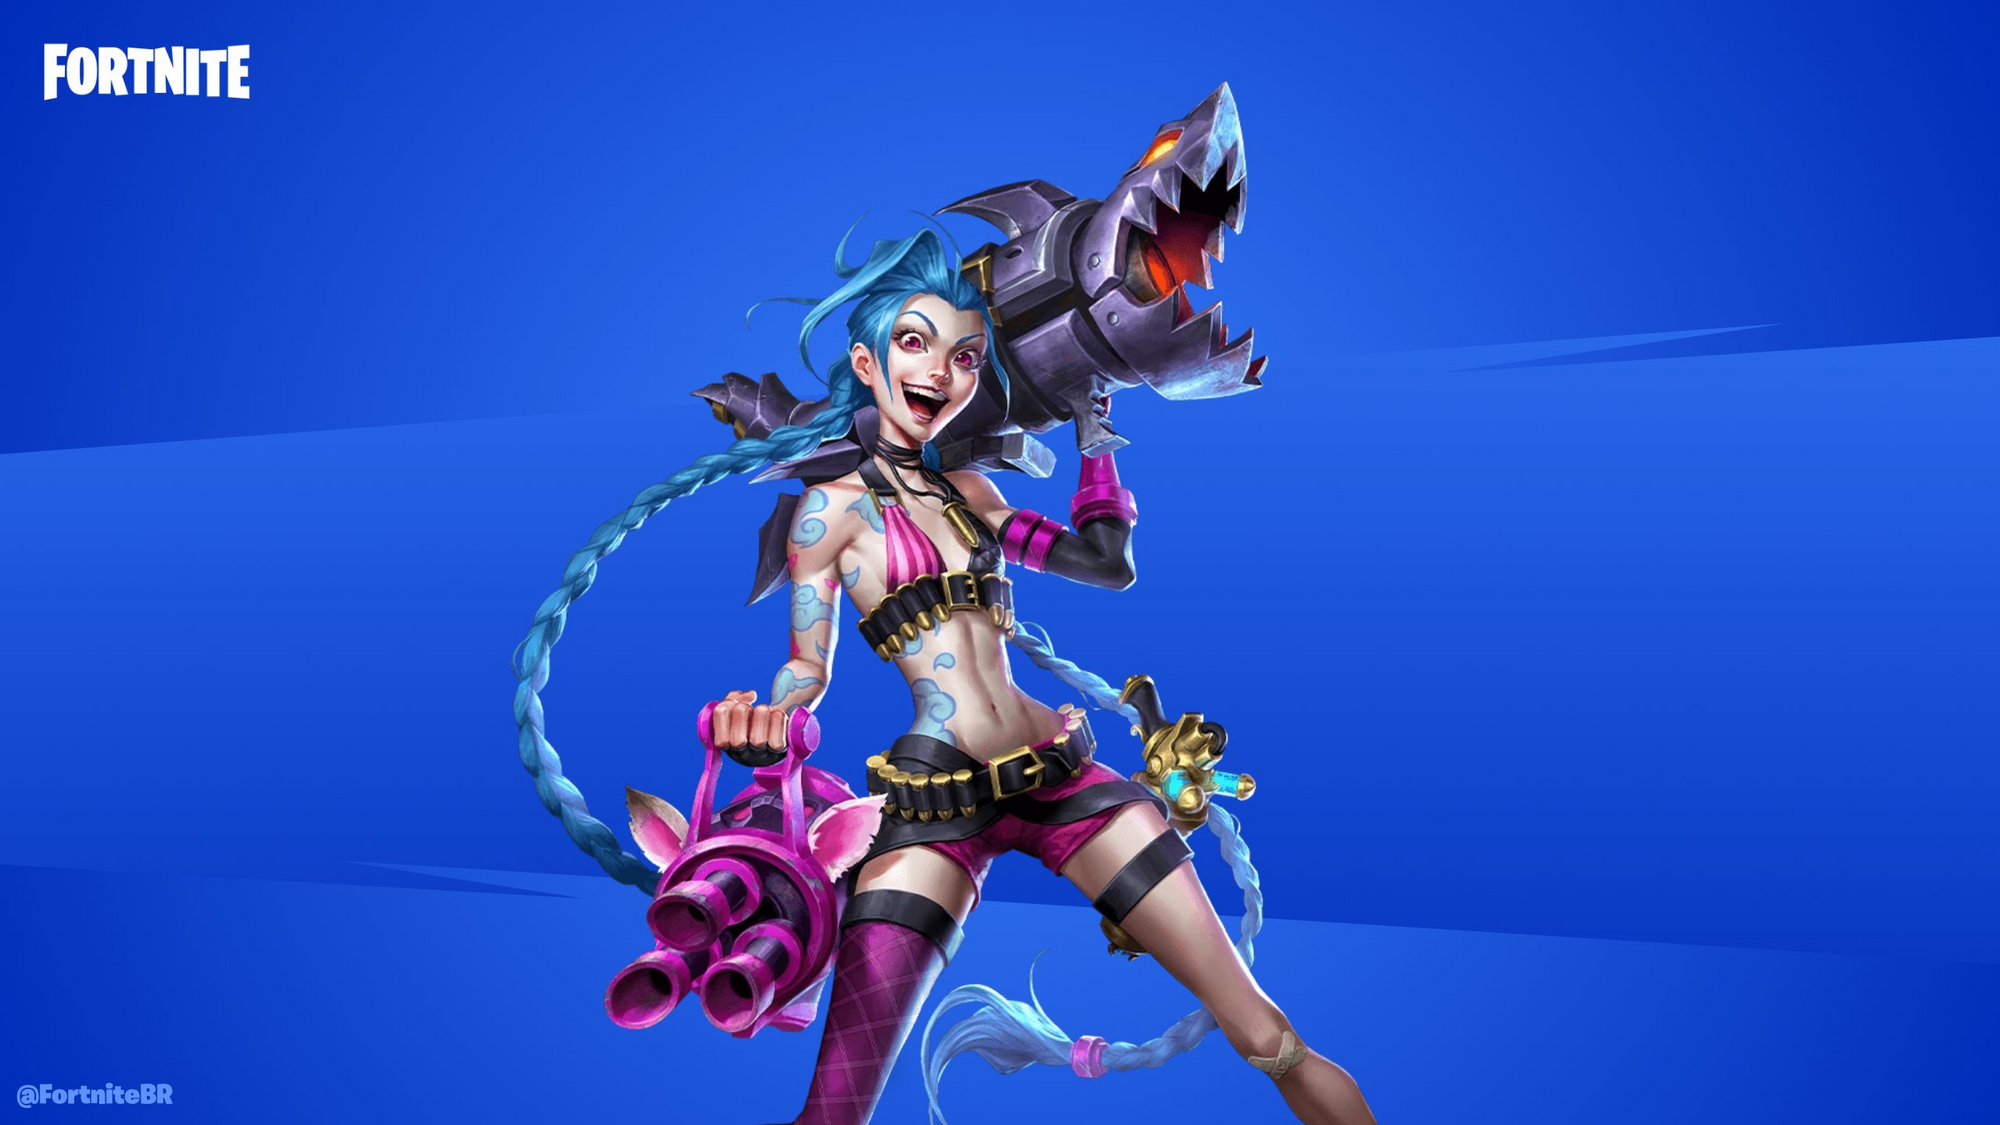 Fortnite x League of Legends Leaked: Jinx to join the Island next week